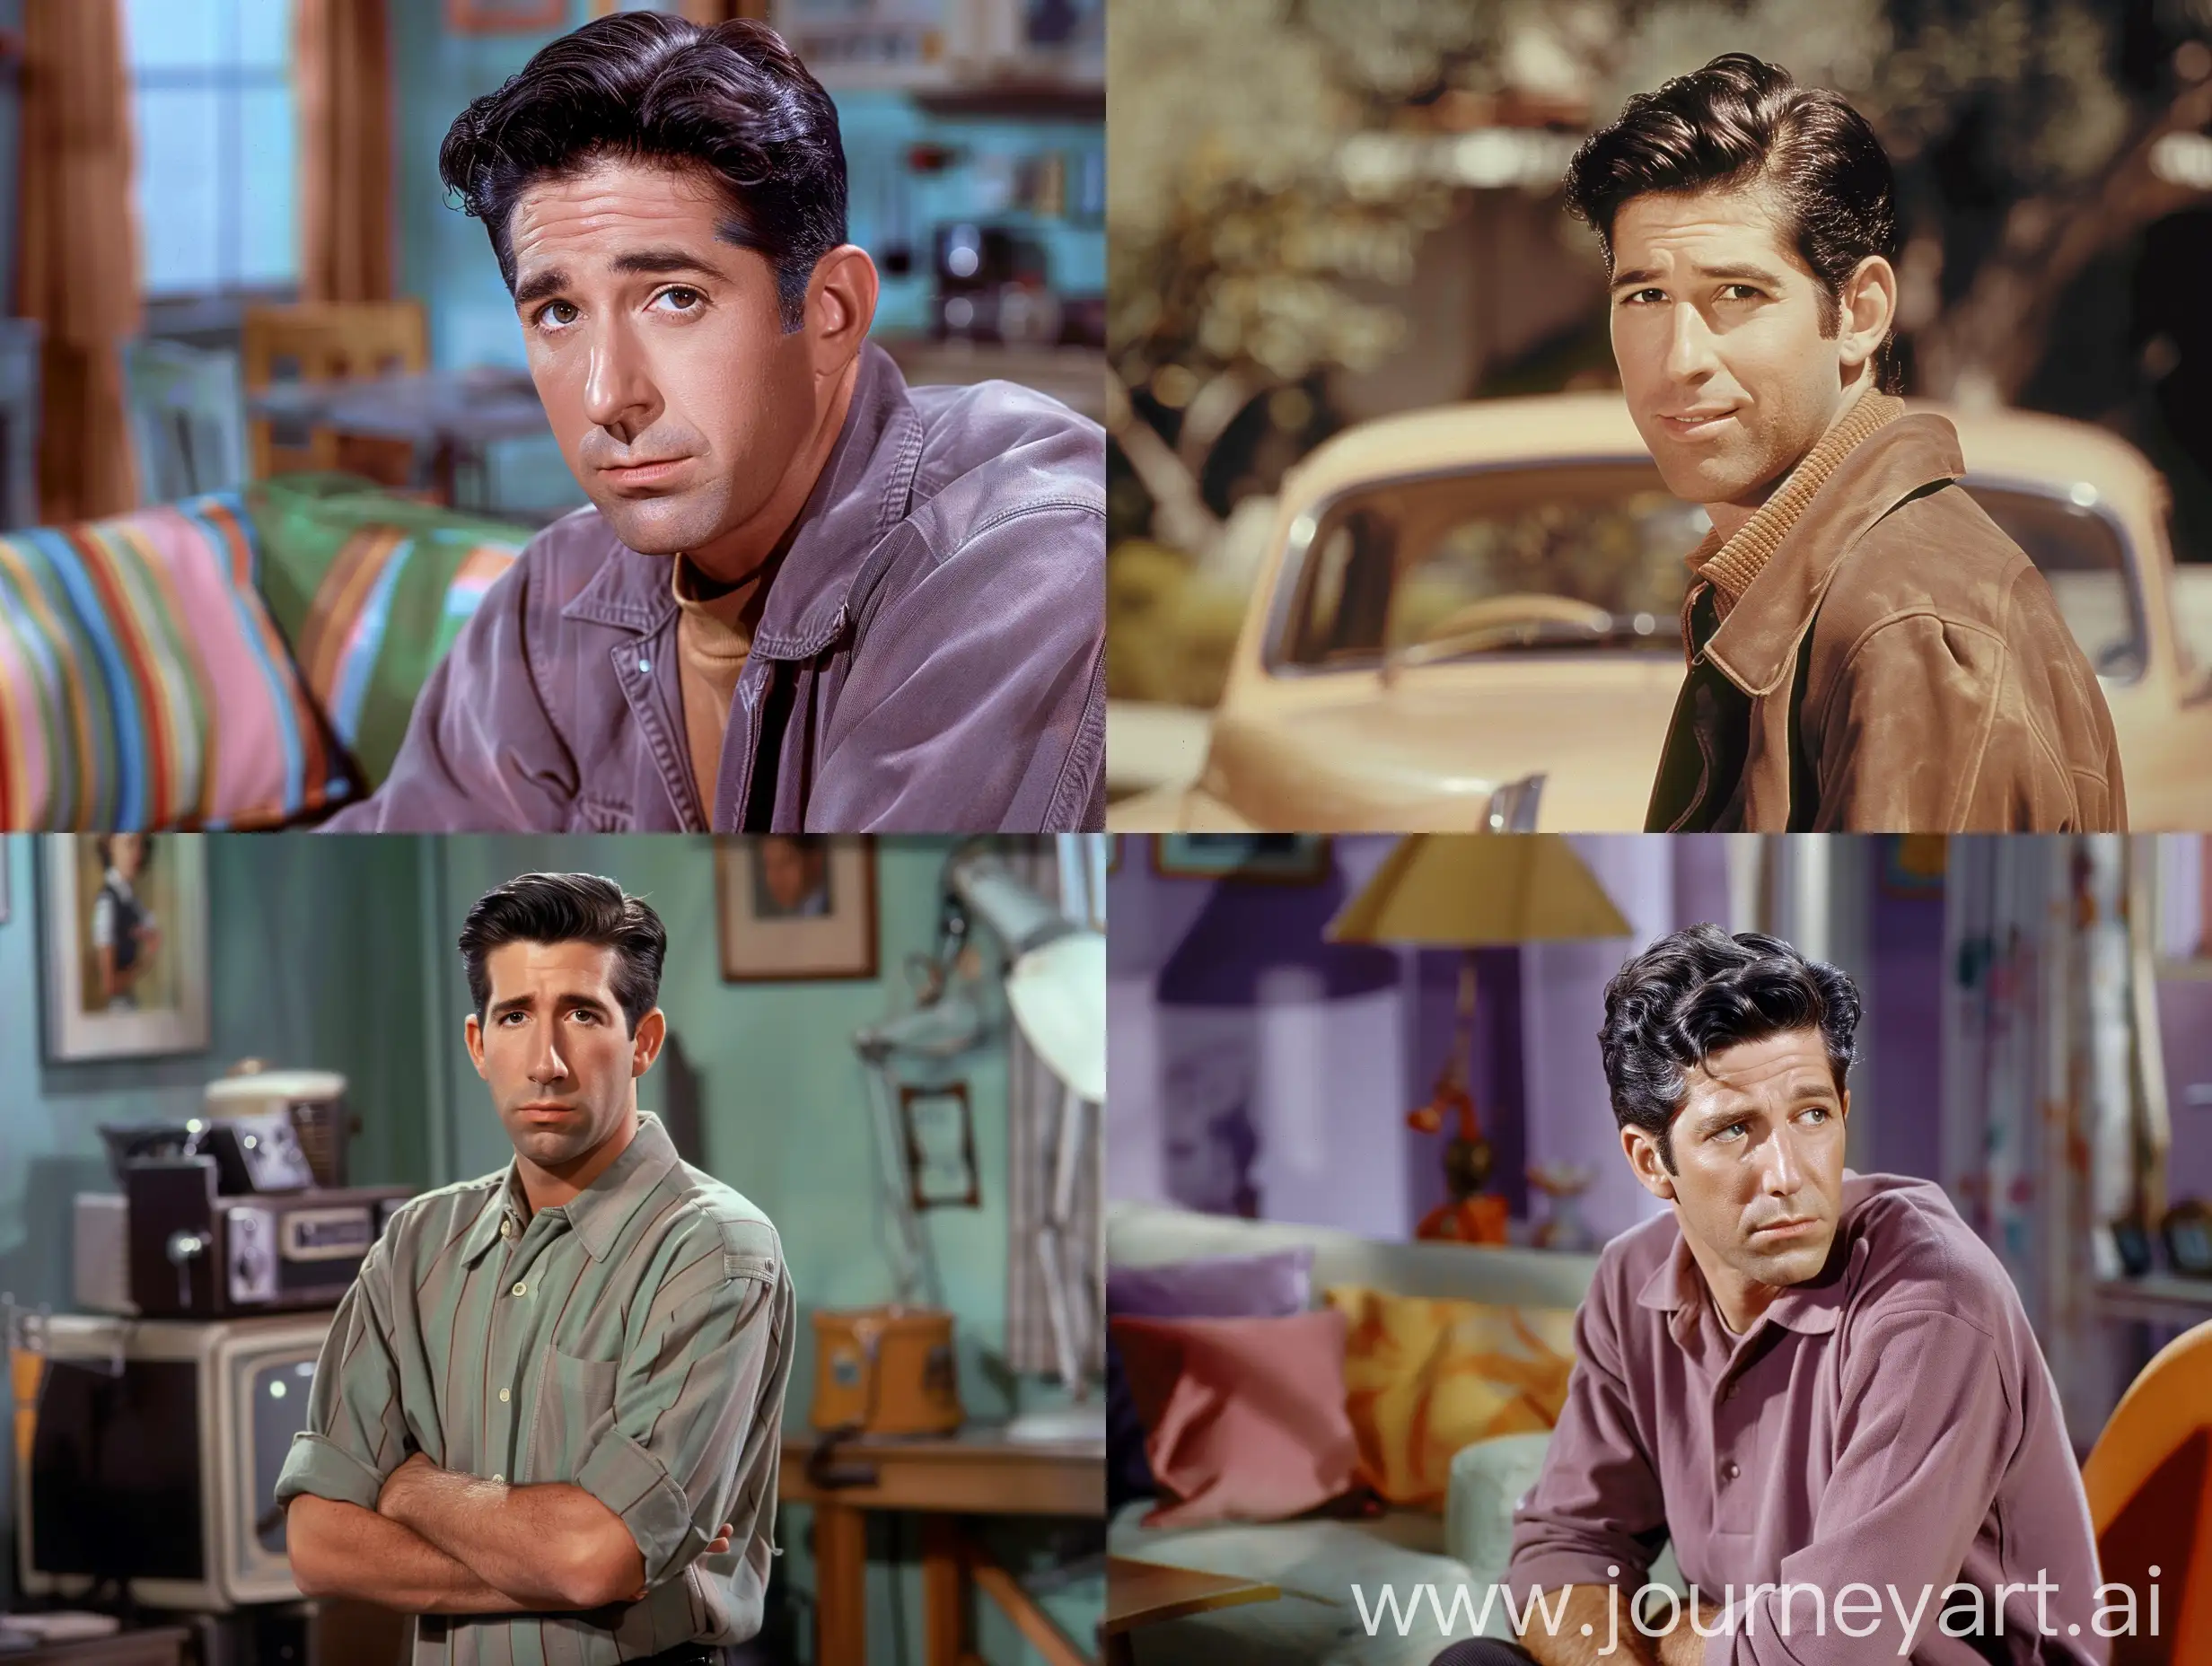 David Schwimmer from friends series,
enhanced by 1950's super panavision 70,colory image